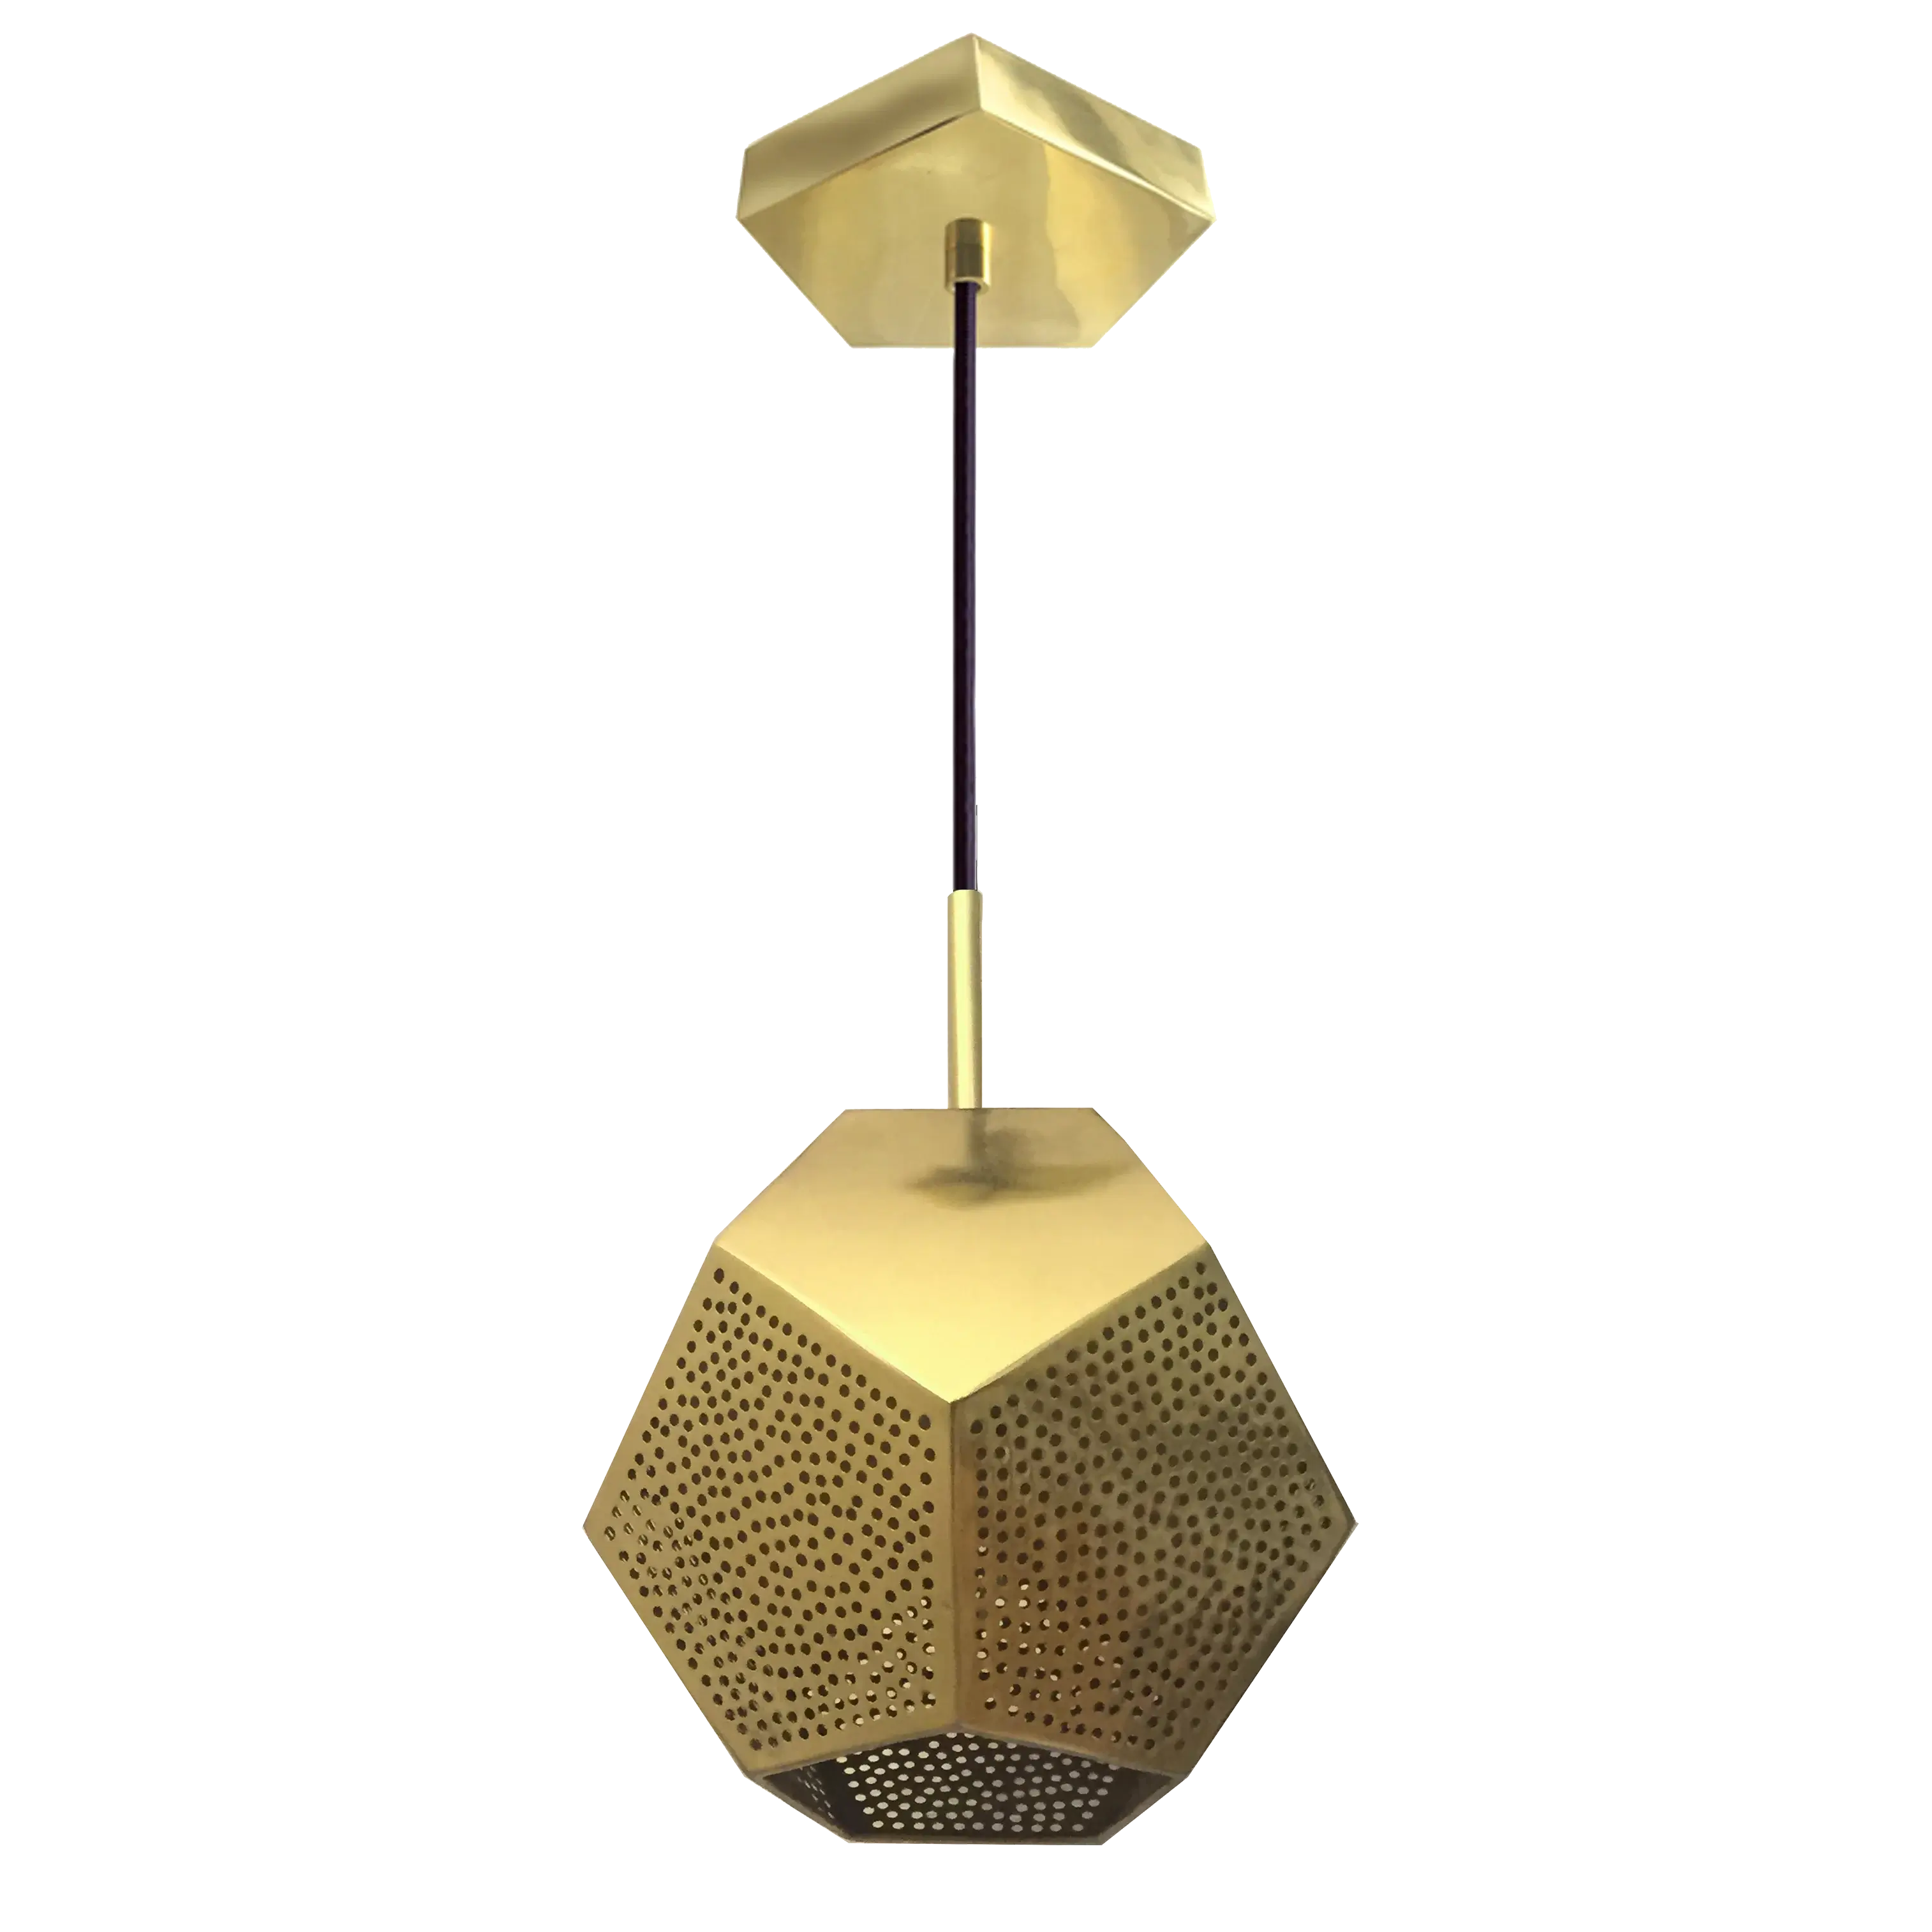 Dounia home Pendant light in Polished brass made of METAL, Model: Ula